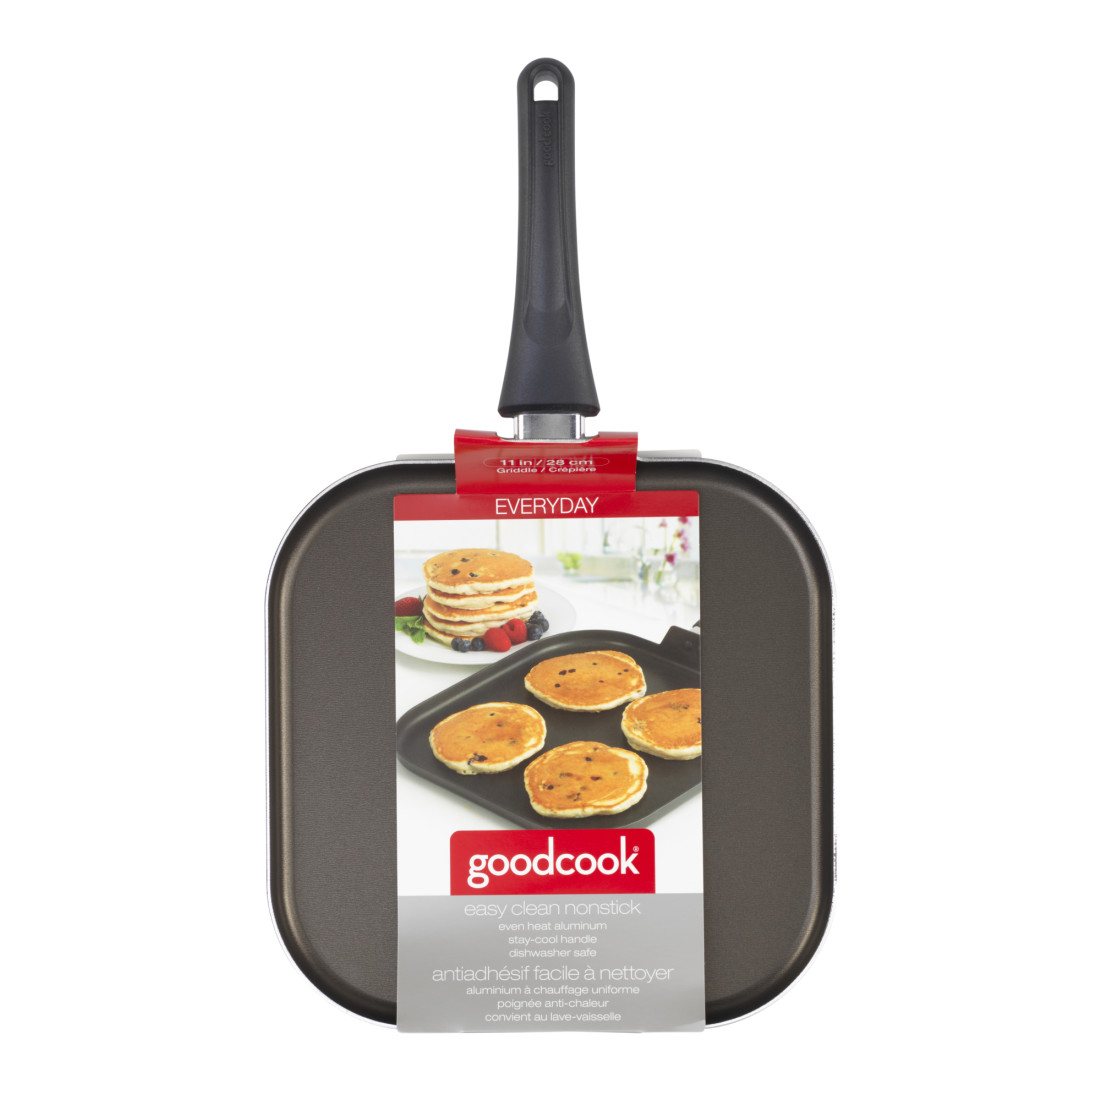 Cooks Standard Nonstick Square Grill Pan 11 x 11-Inch, Hard